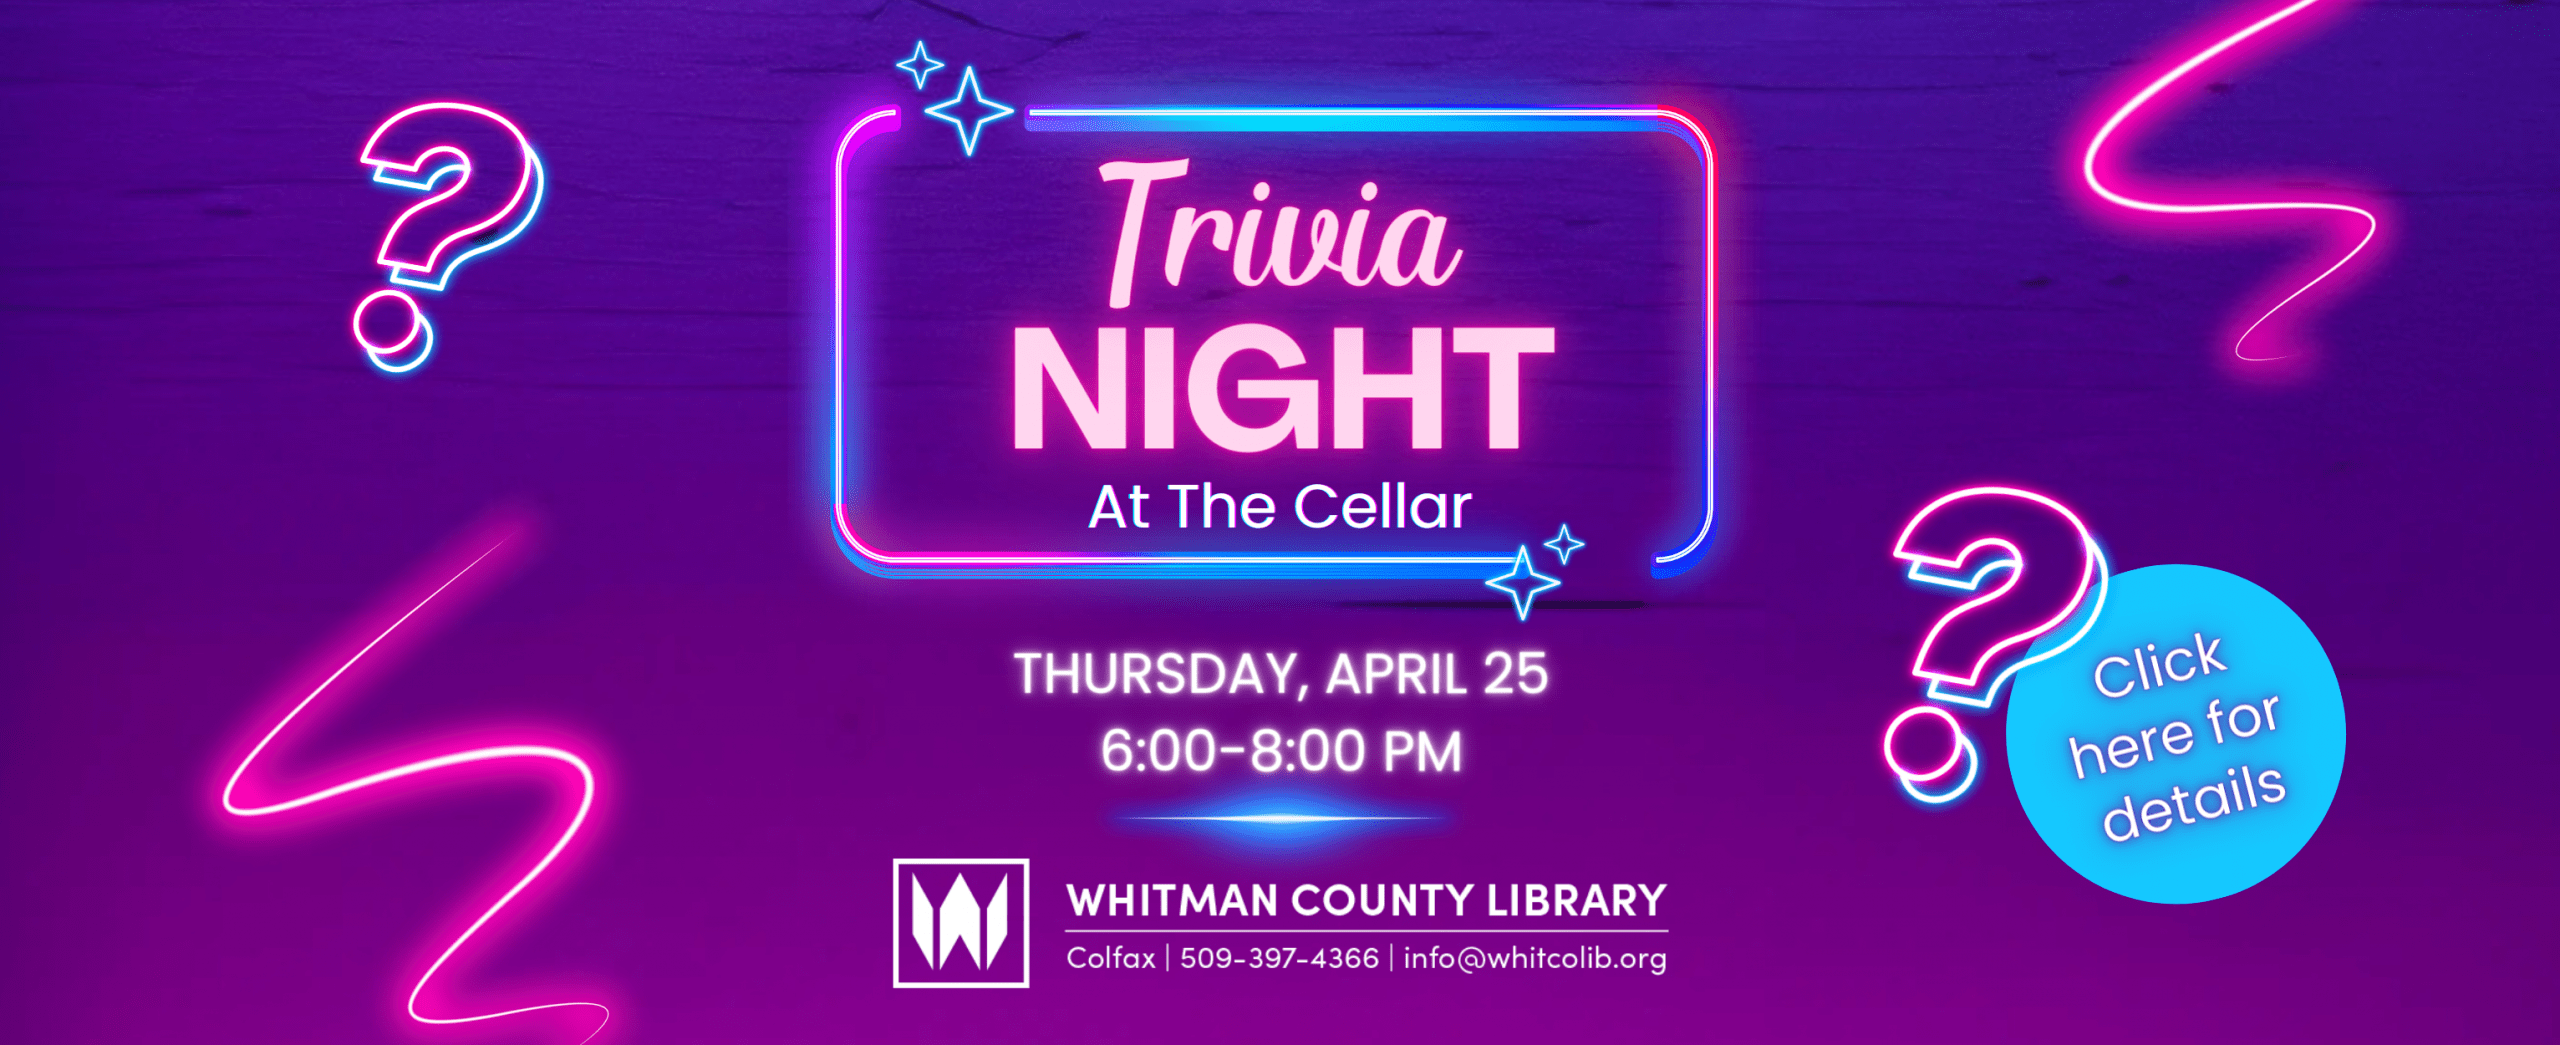 Join us for Trivia Night at the Cellar Wine and Beer Bar on Thursday, April 25 at 6:00 PM. Click here for details.